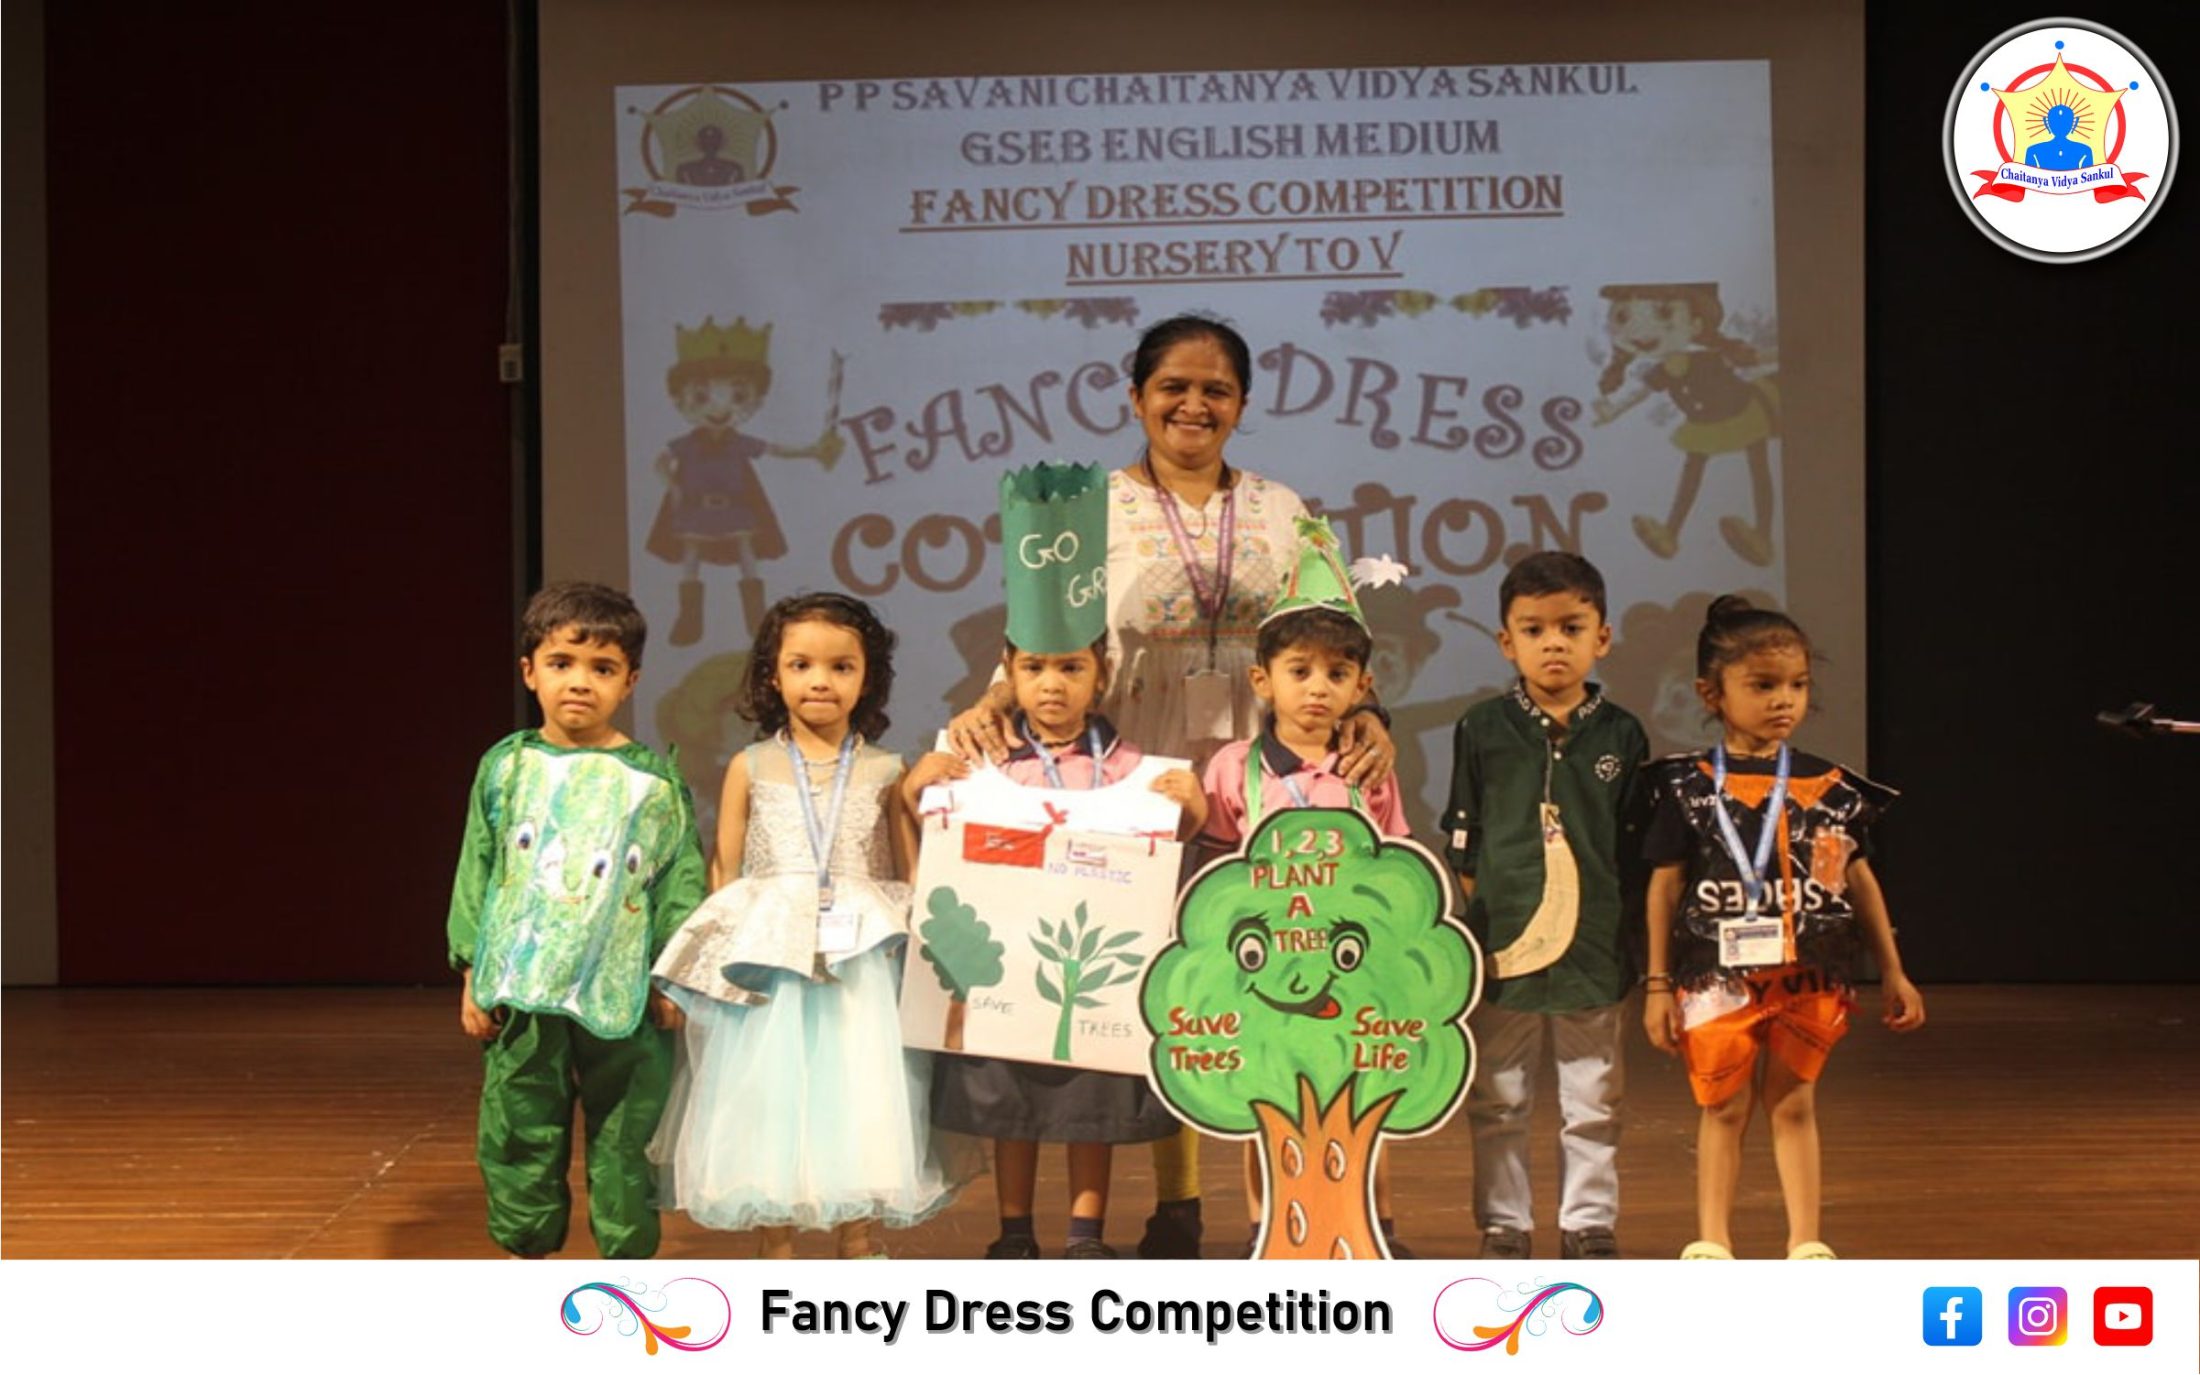 Fency Dress Competition